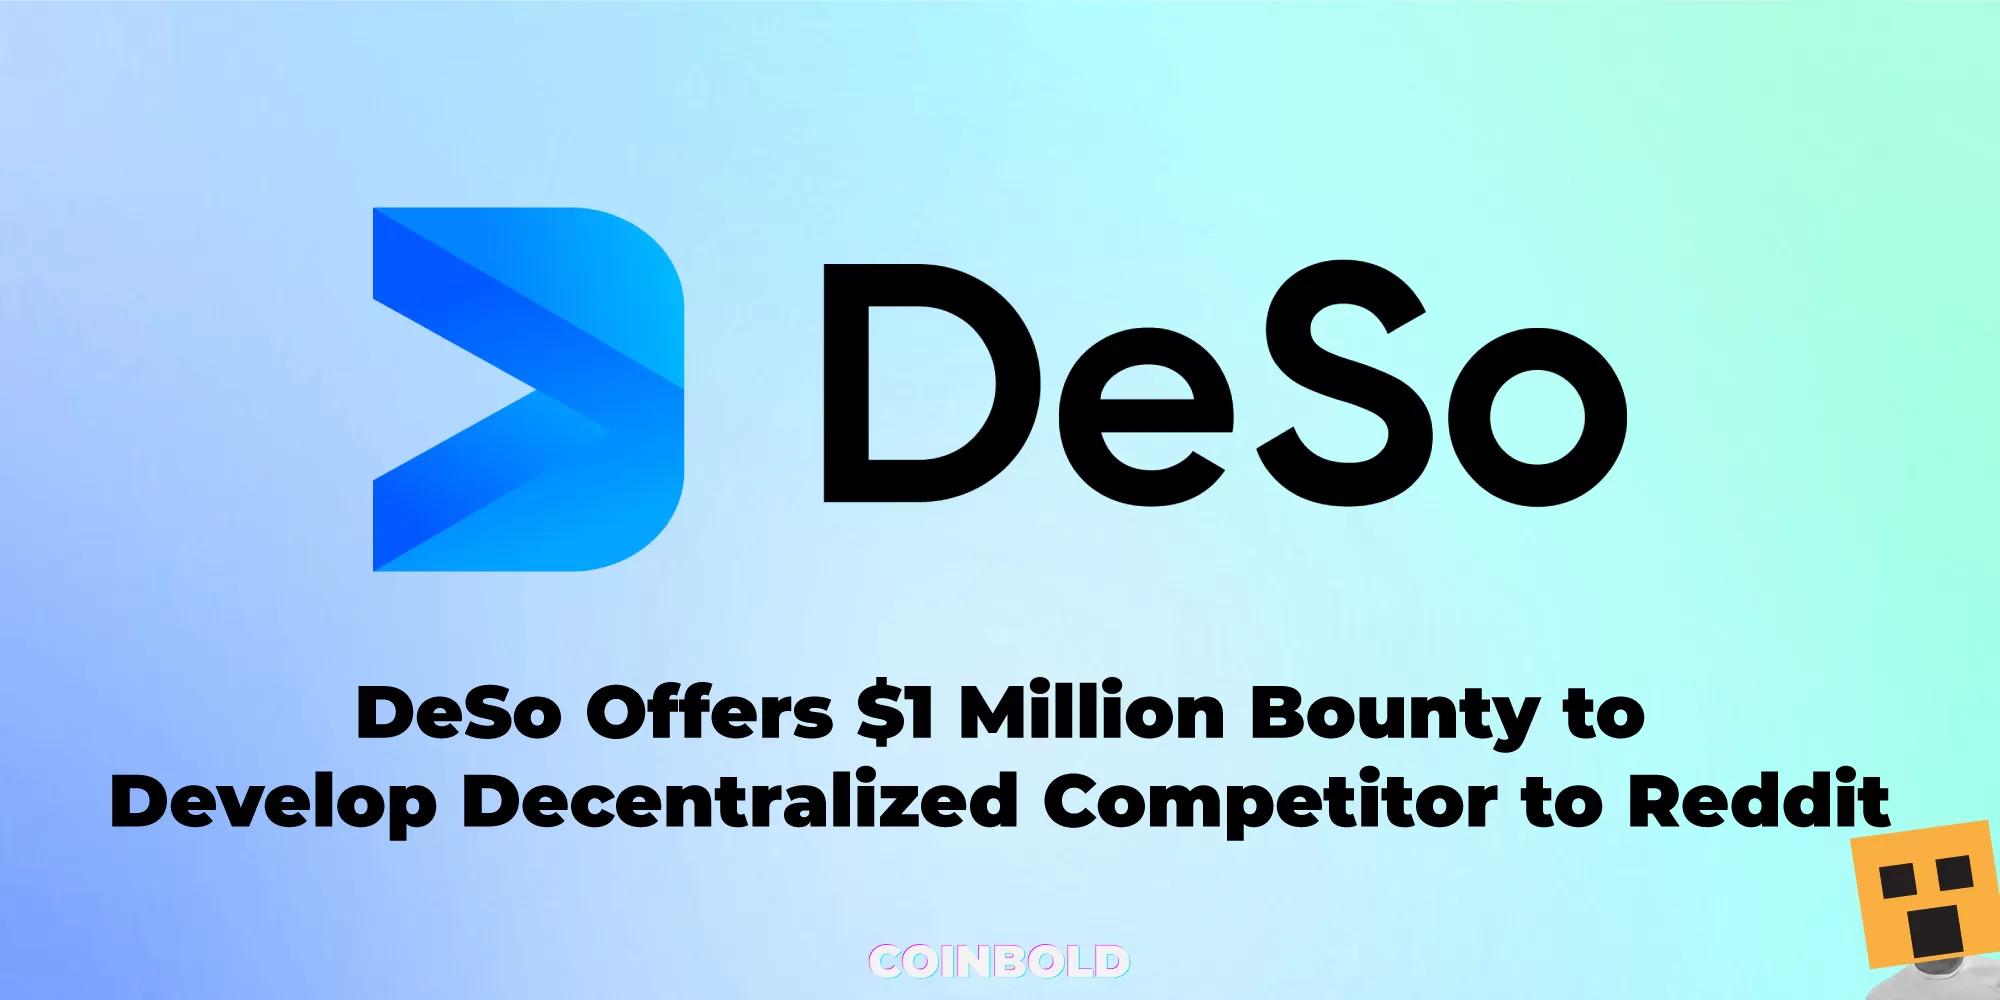 DeSo Offers $1 Million Bounty to Develop Decentralized Competitor to Reddit